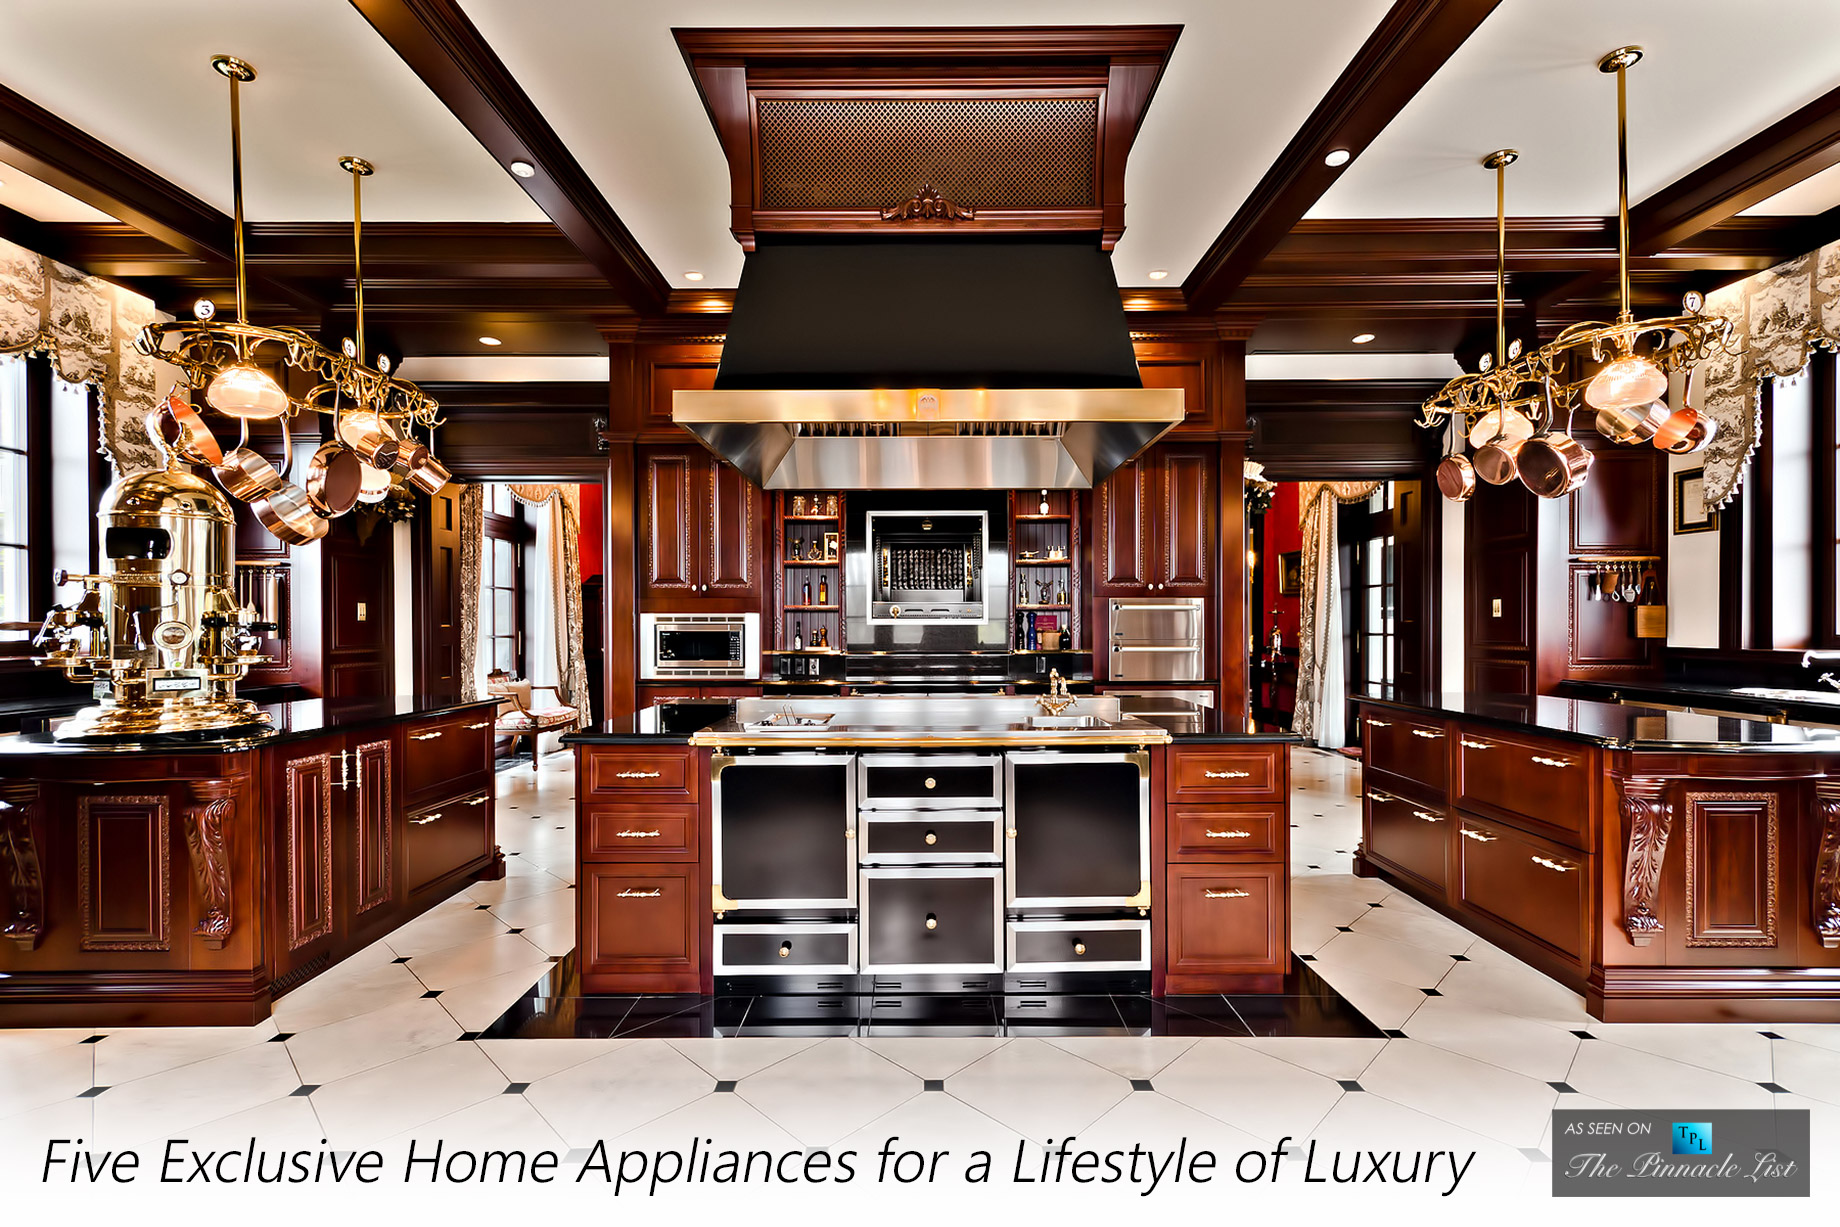 Five Exclusive Home Appliances for a Lifestyle of Luxury